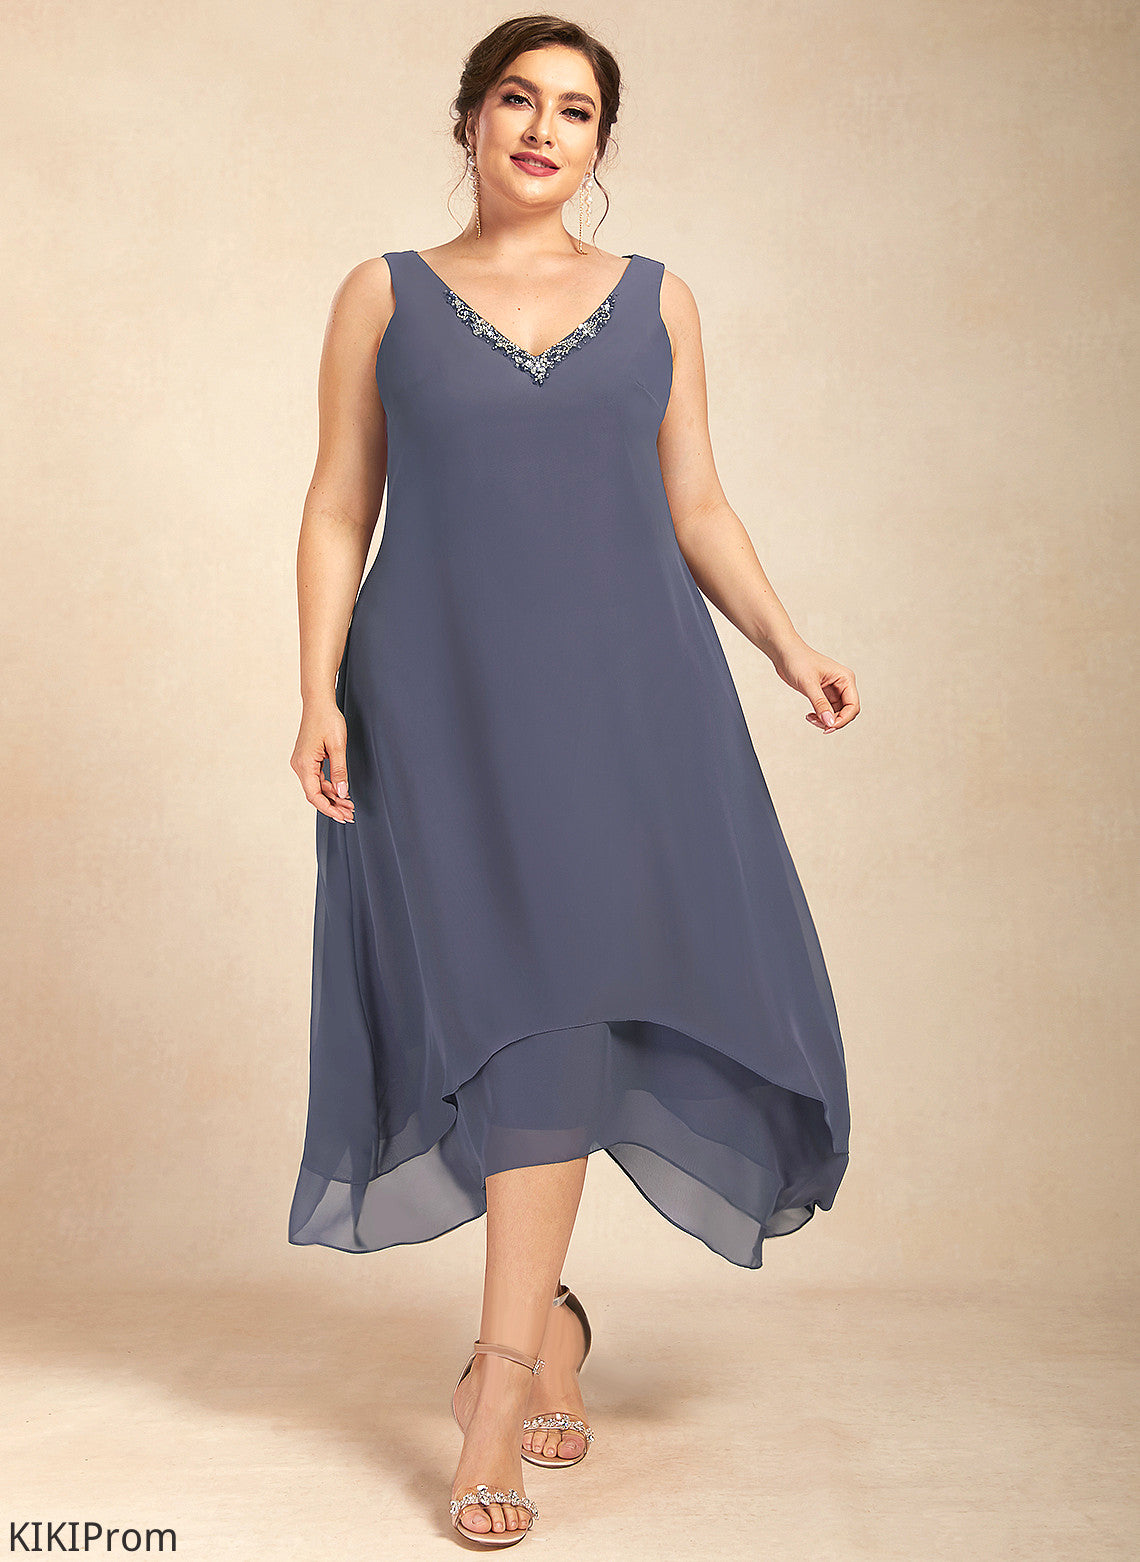 Ankle-Length Dress V-neck Lucinda With Cocktail Dresses Beading Cocktail A-Line Chiffon